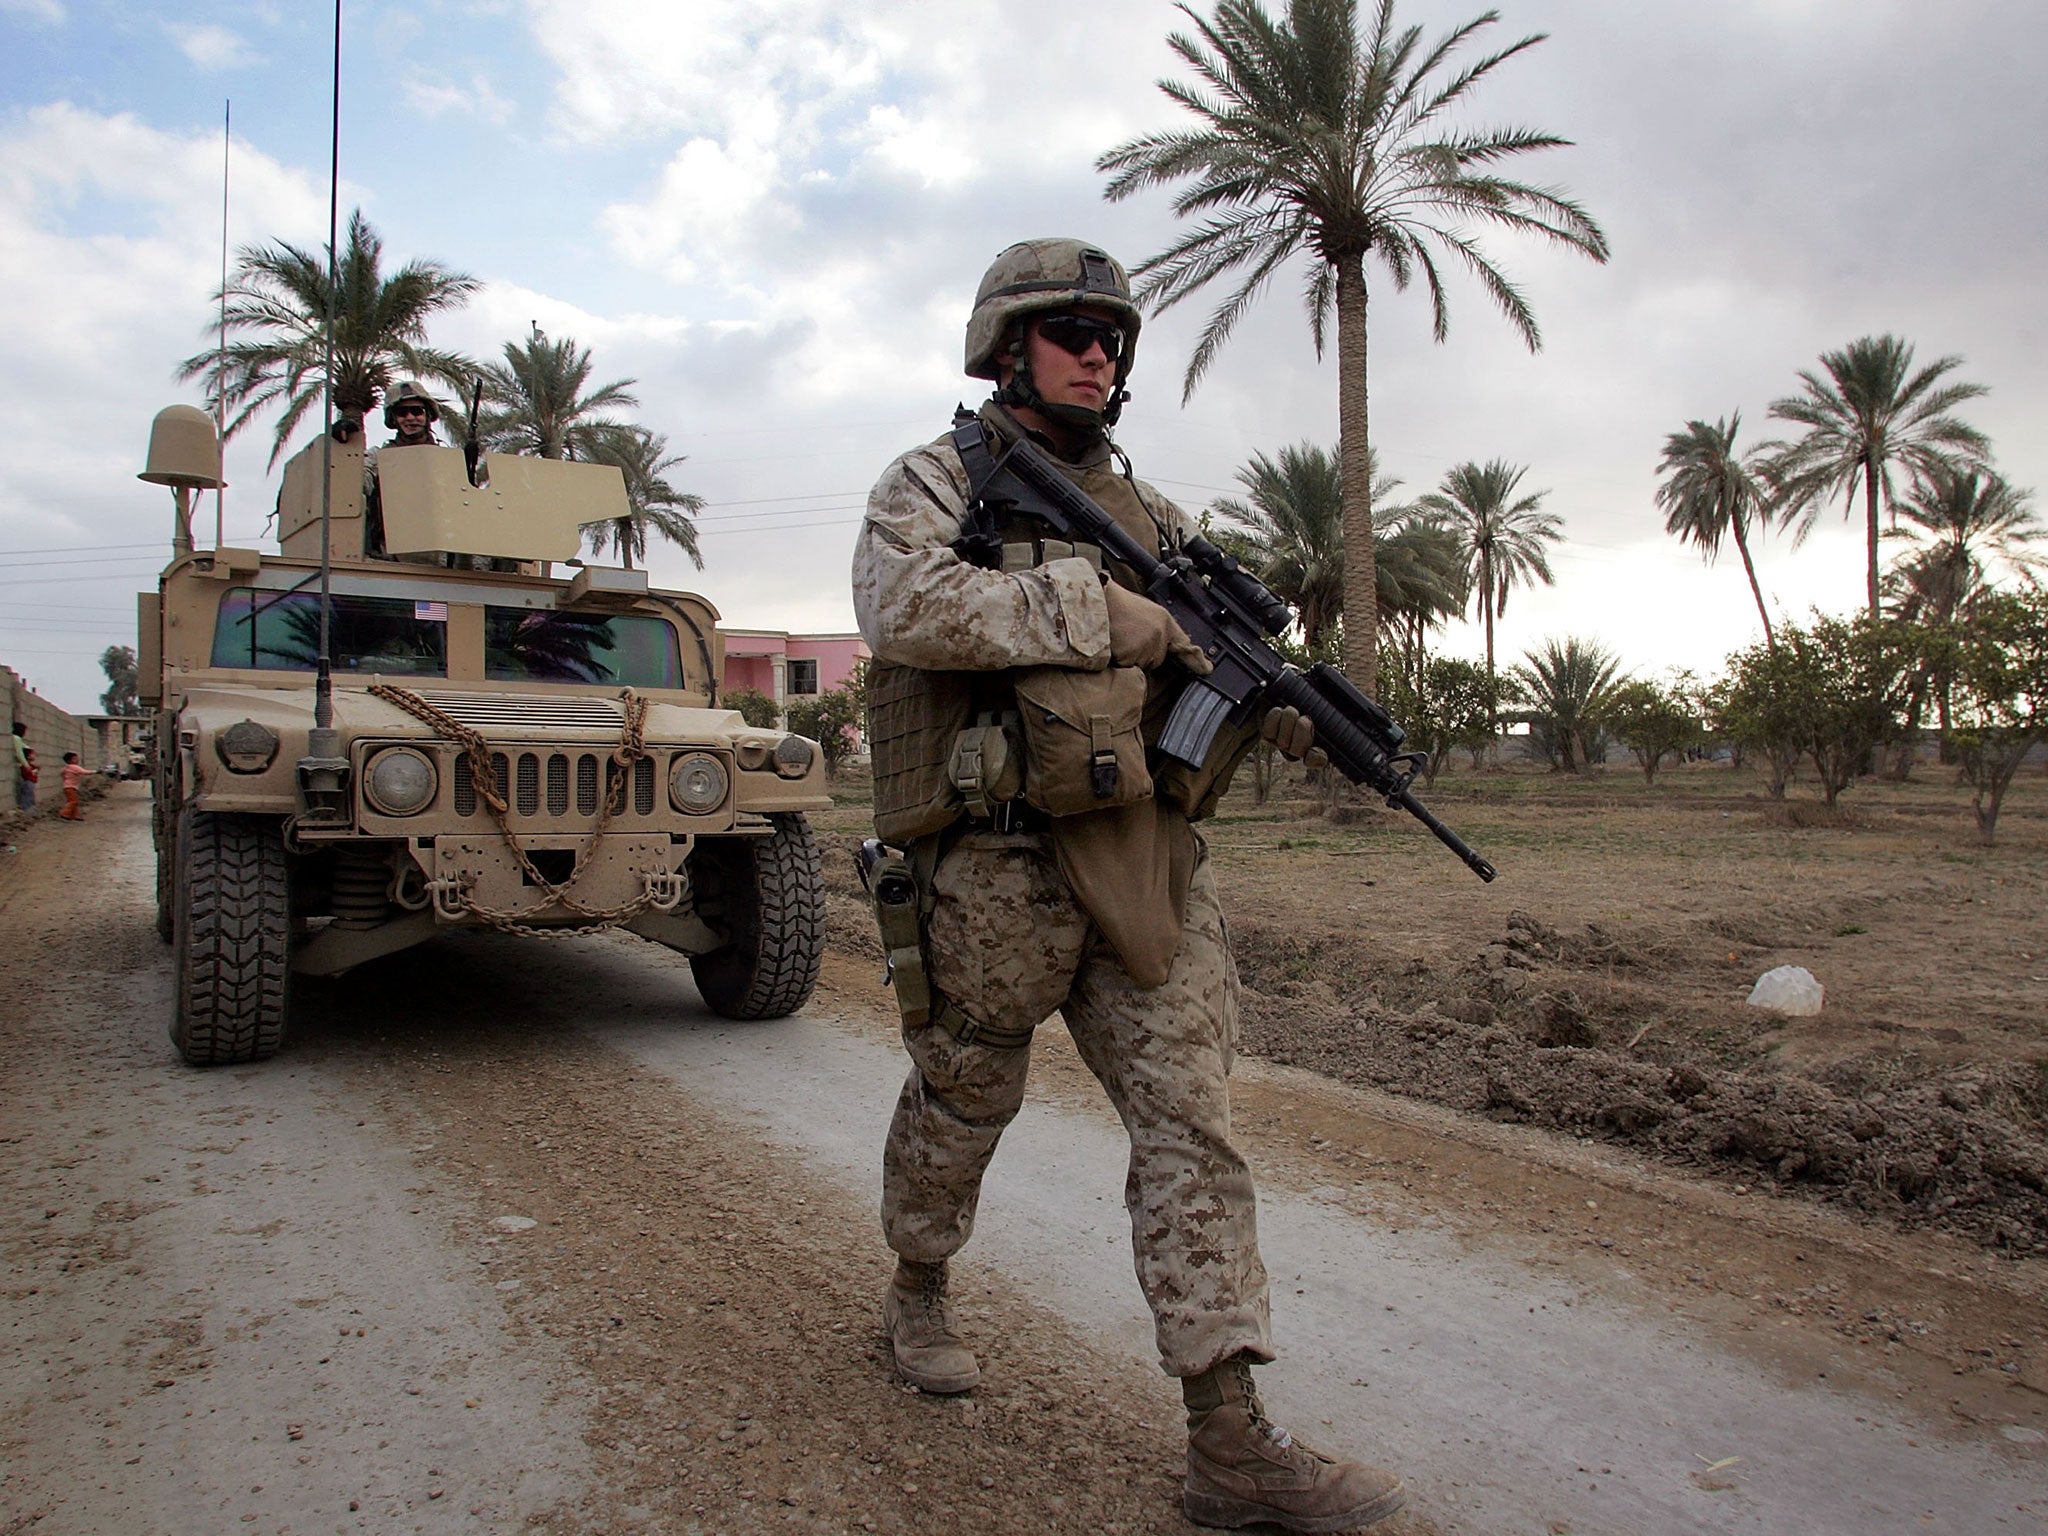 File image shows a US service member in Iraq